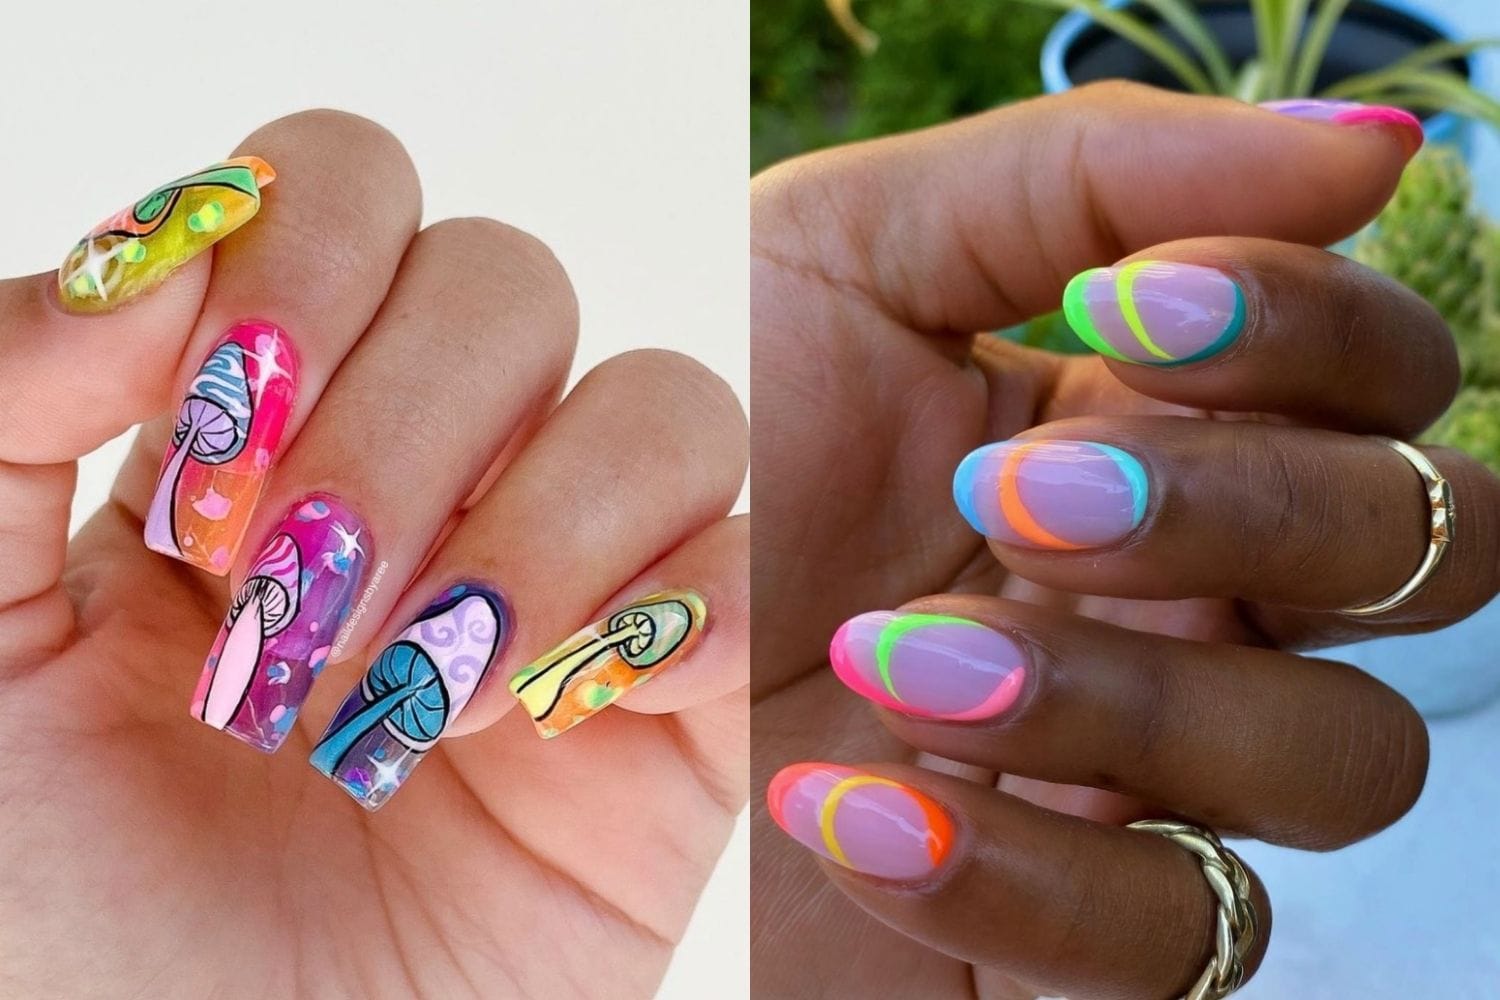 4. Neon Halloween Nail Designs for Short Nails - wide 2